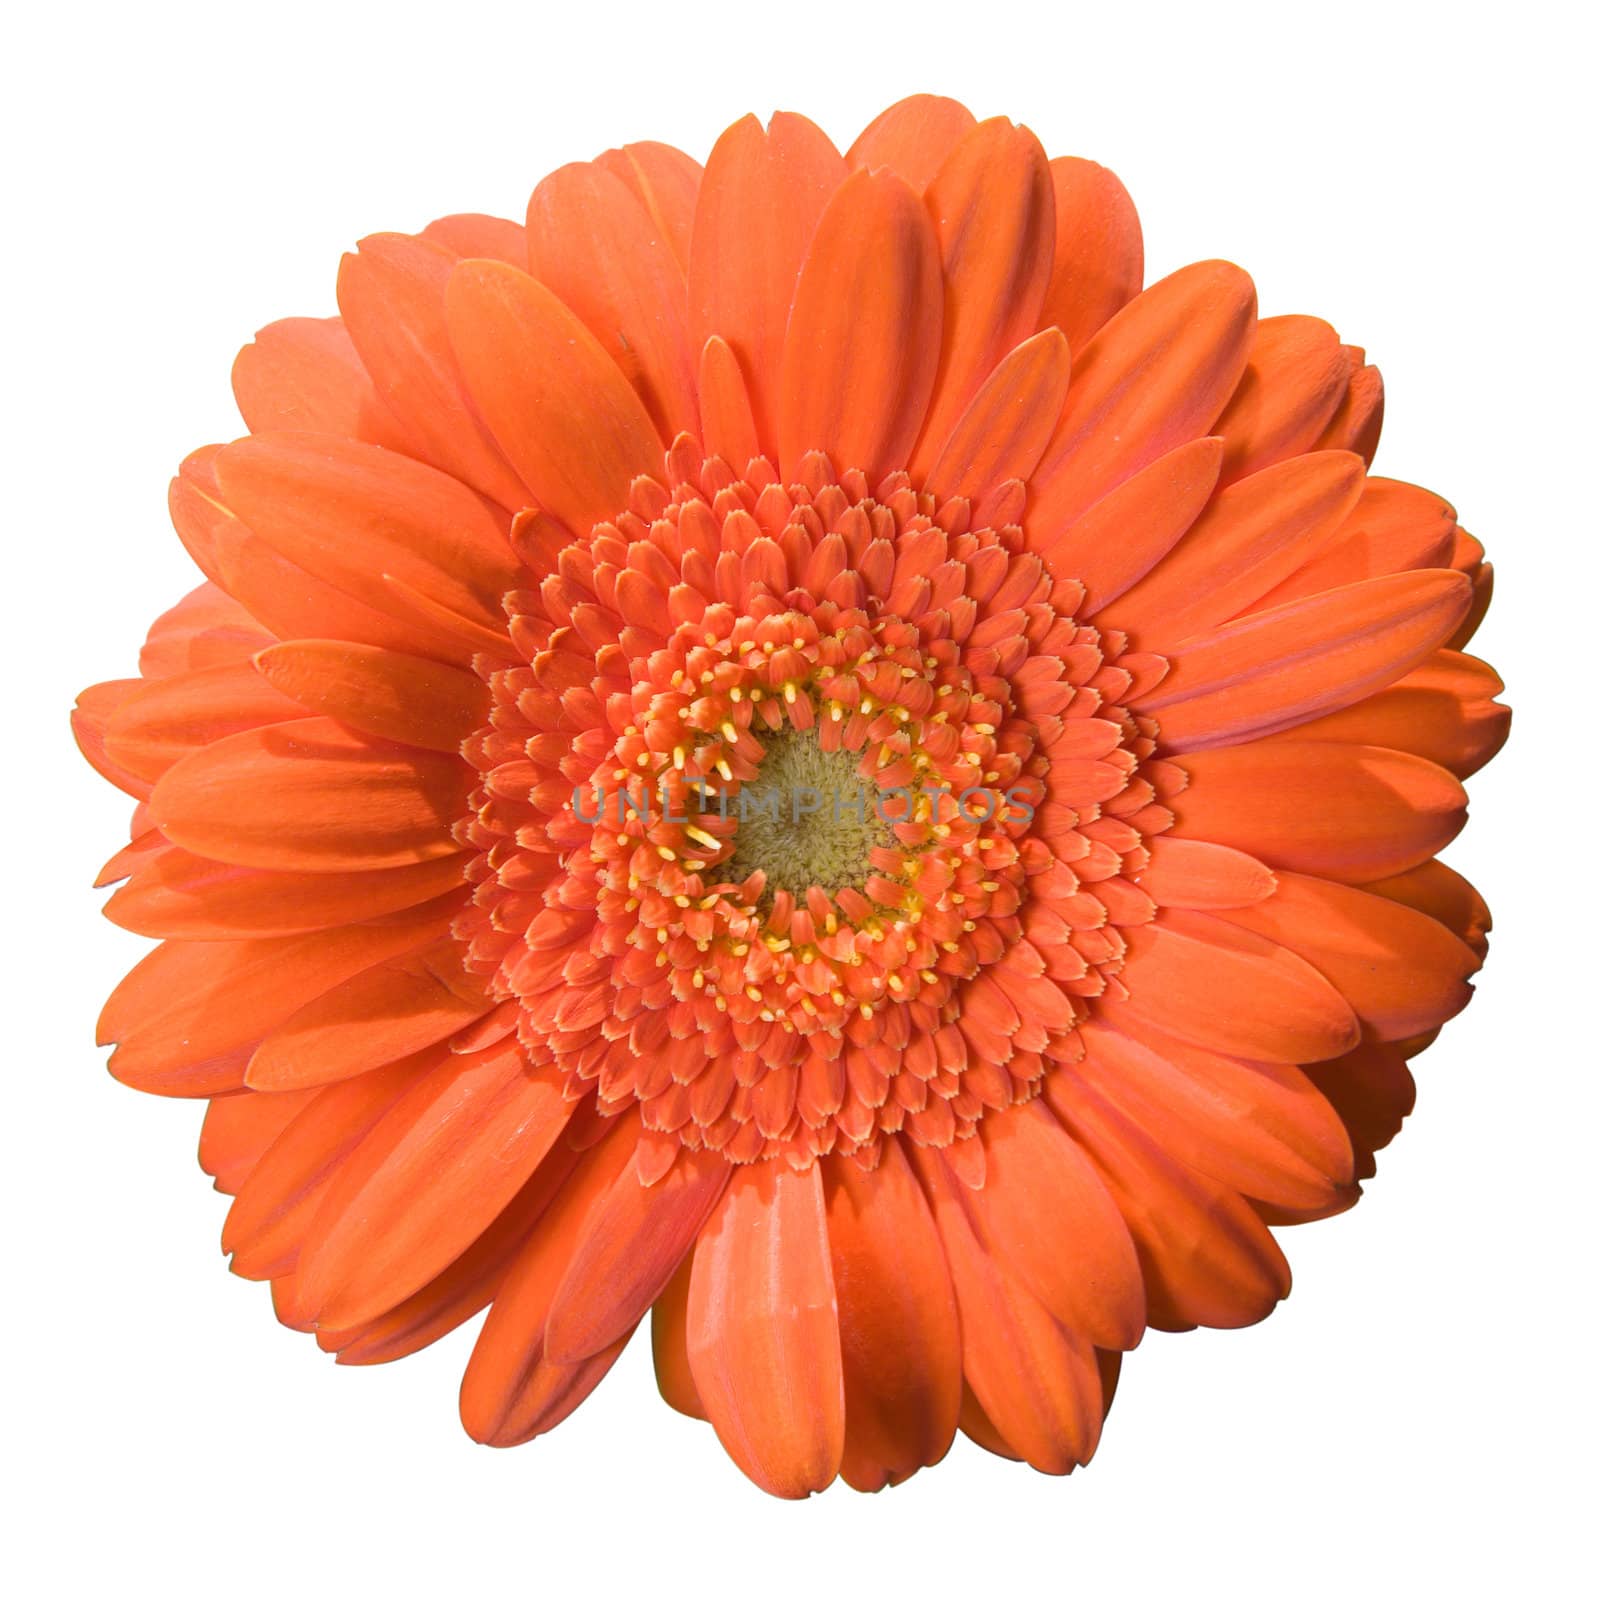 Gerbera bloom isolated on a white background